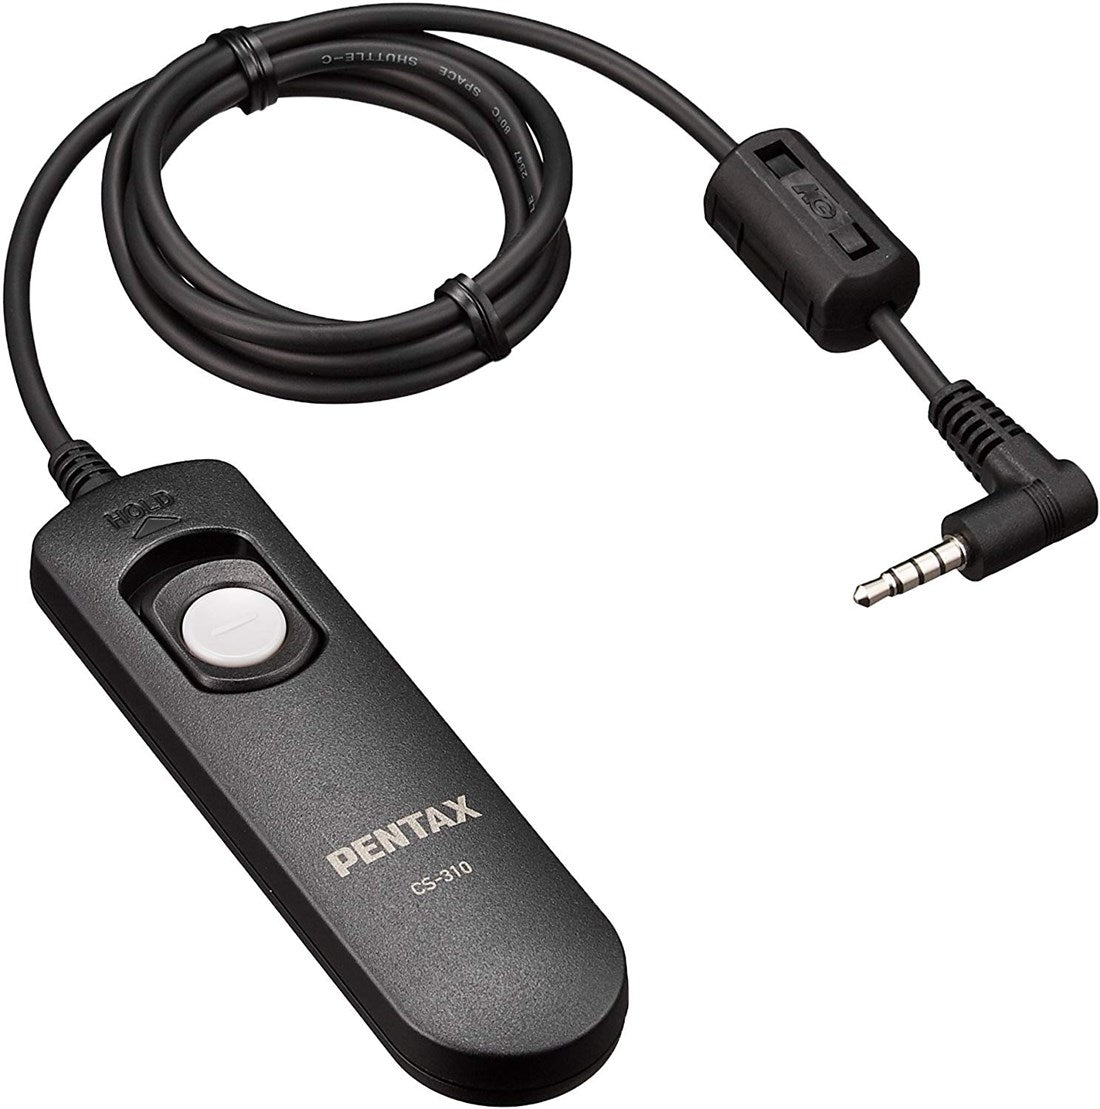 Product Image of Pentax CS-310 Cable switch Shutter Release - Accessory for Portable Devices